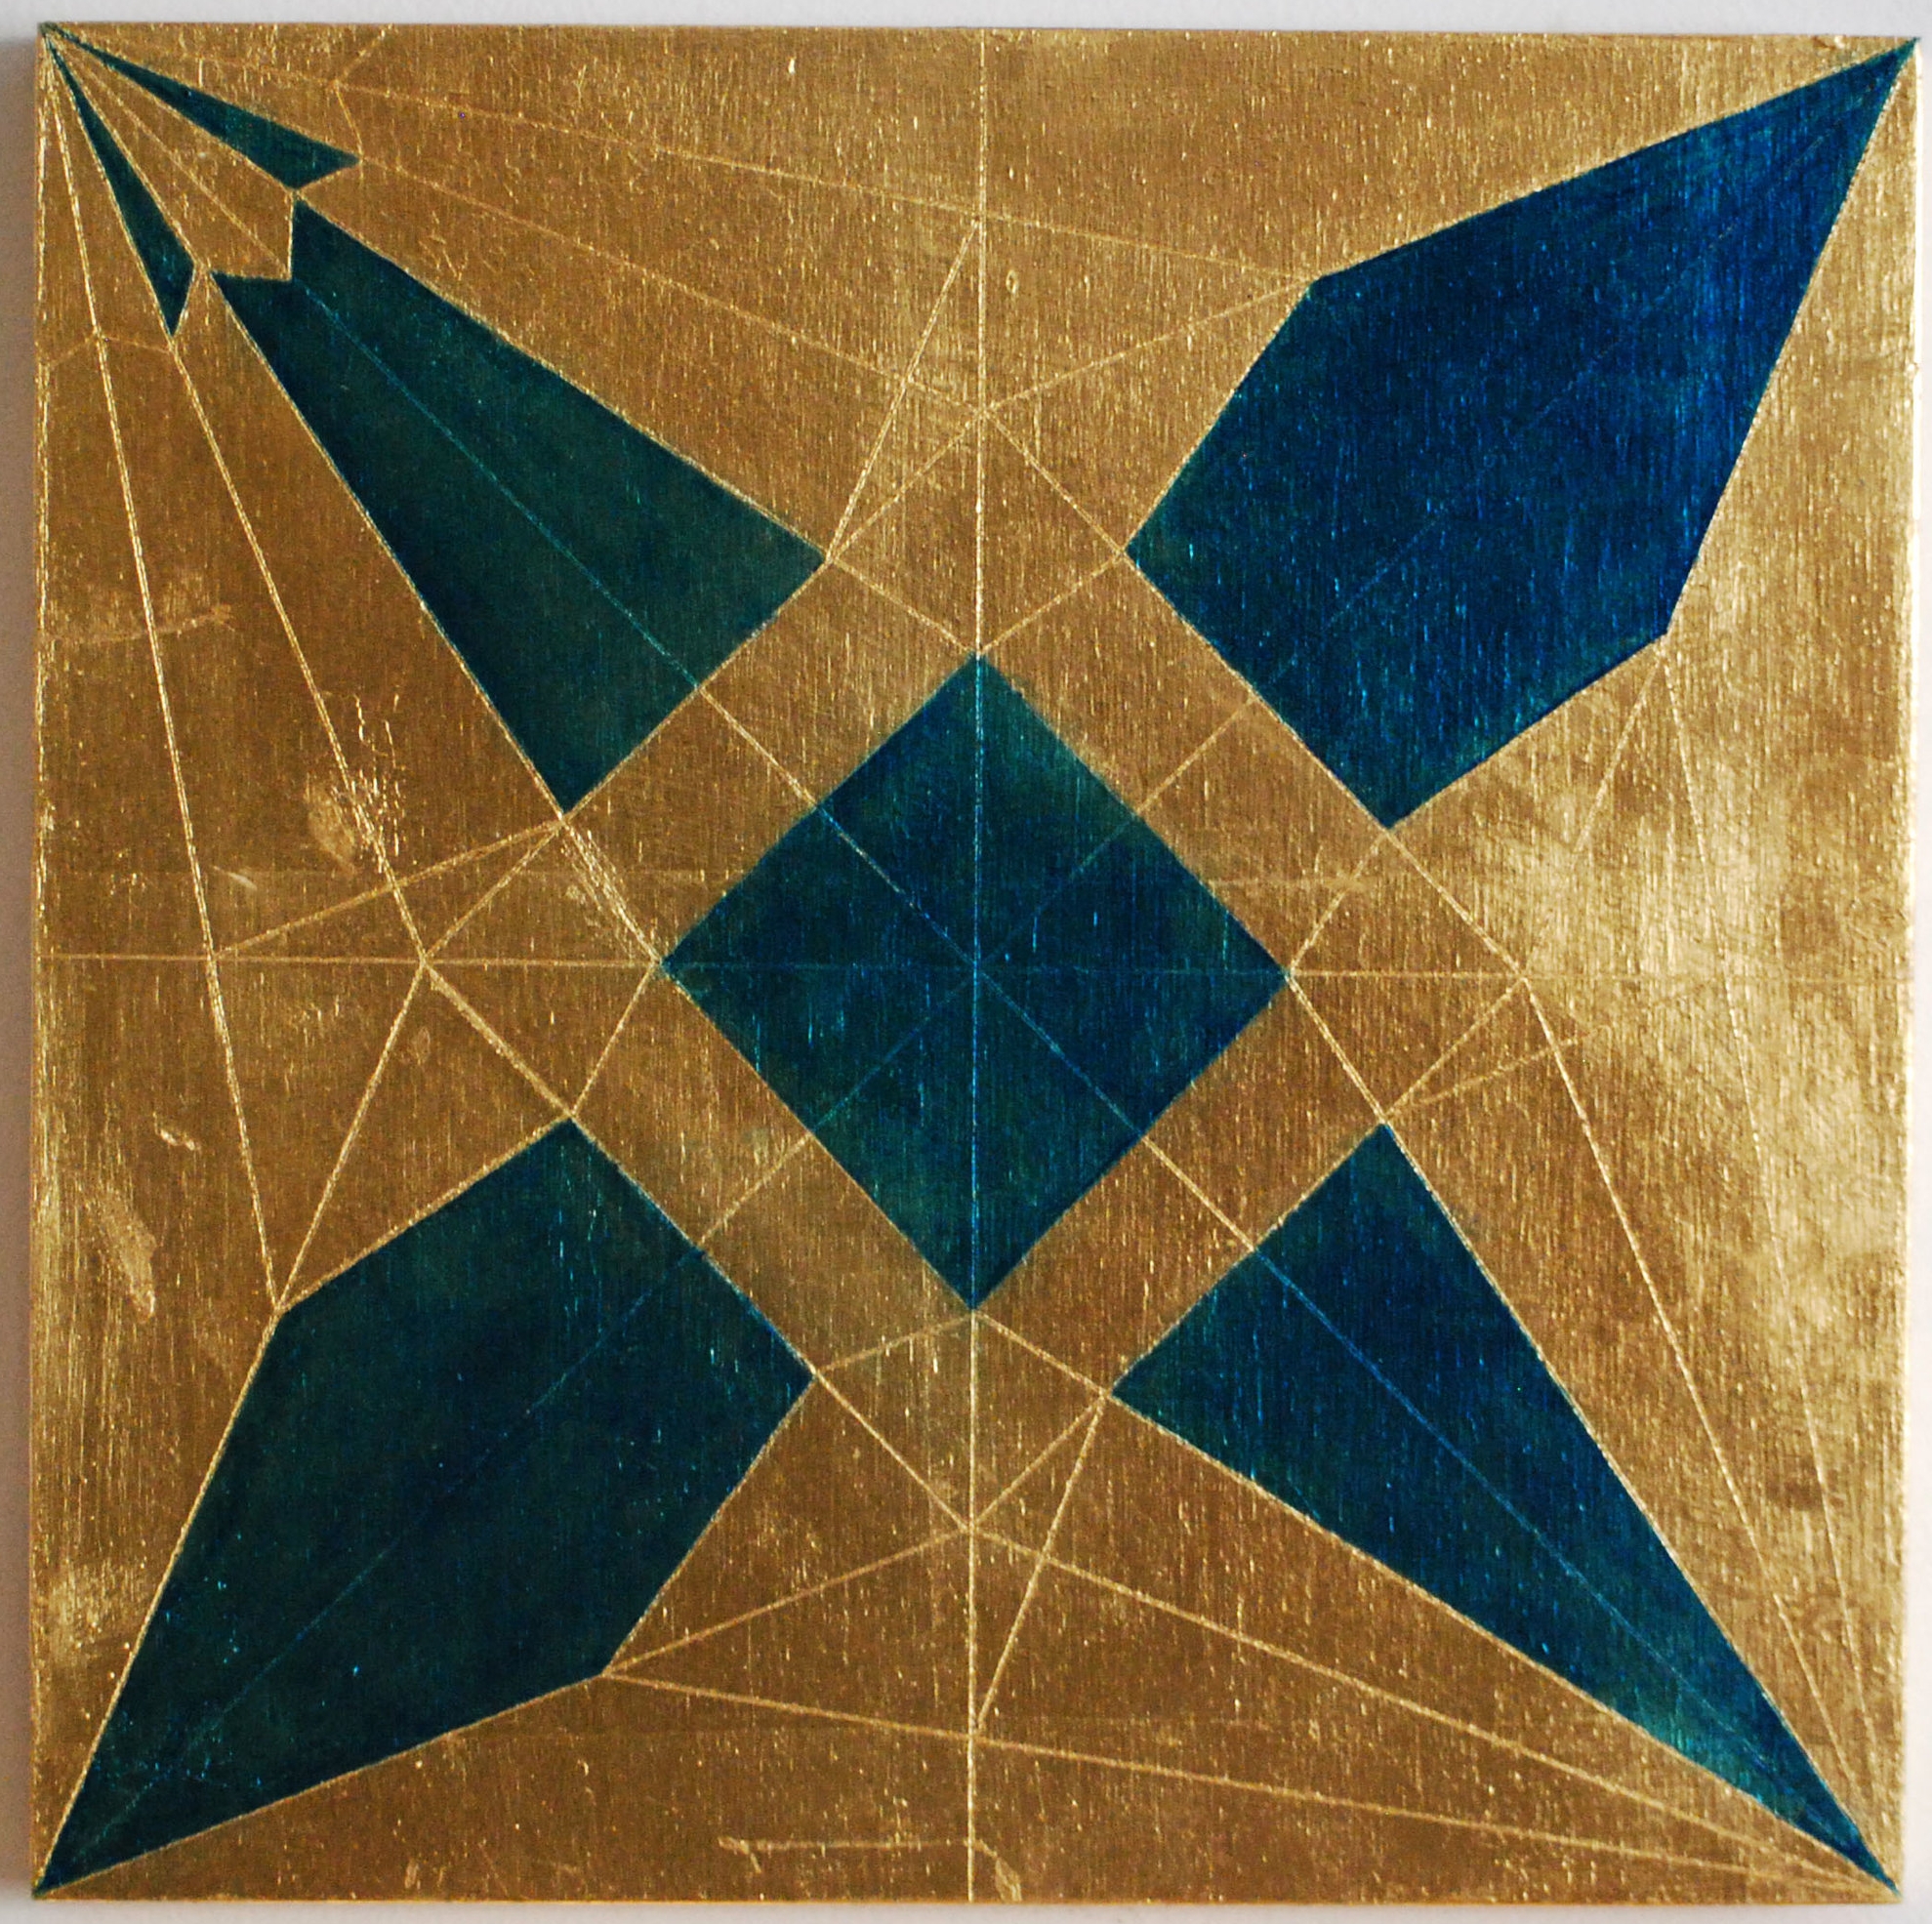 Peace Study I, 2016, Oil and patina on gold-leafed panel, 12” x 12”